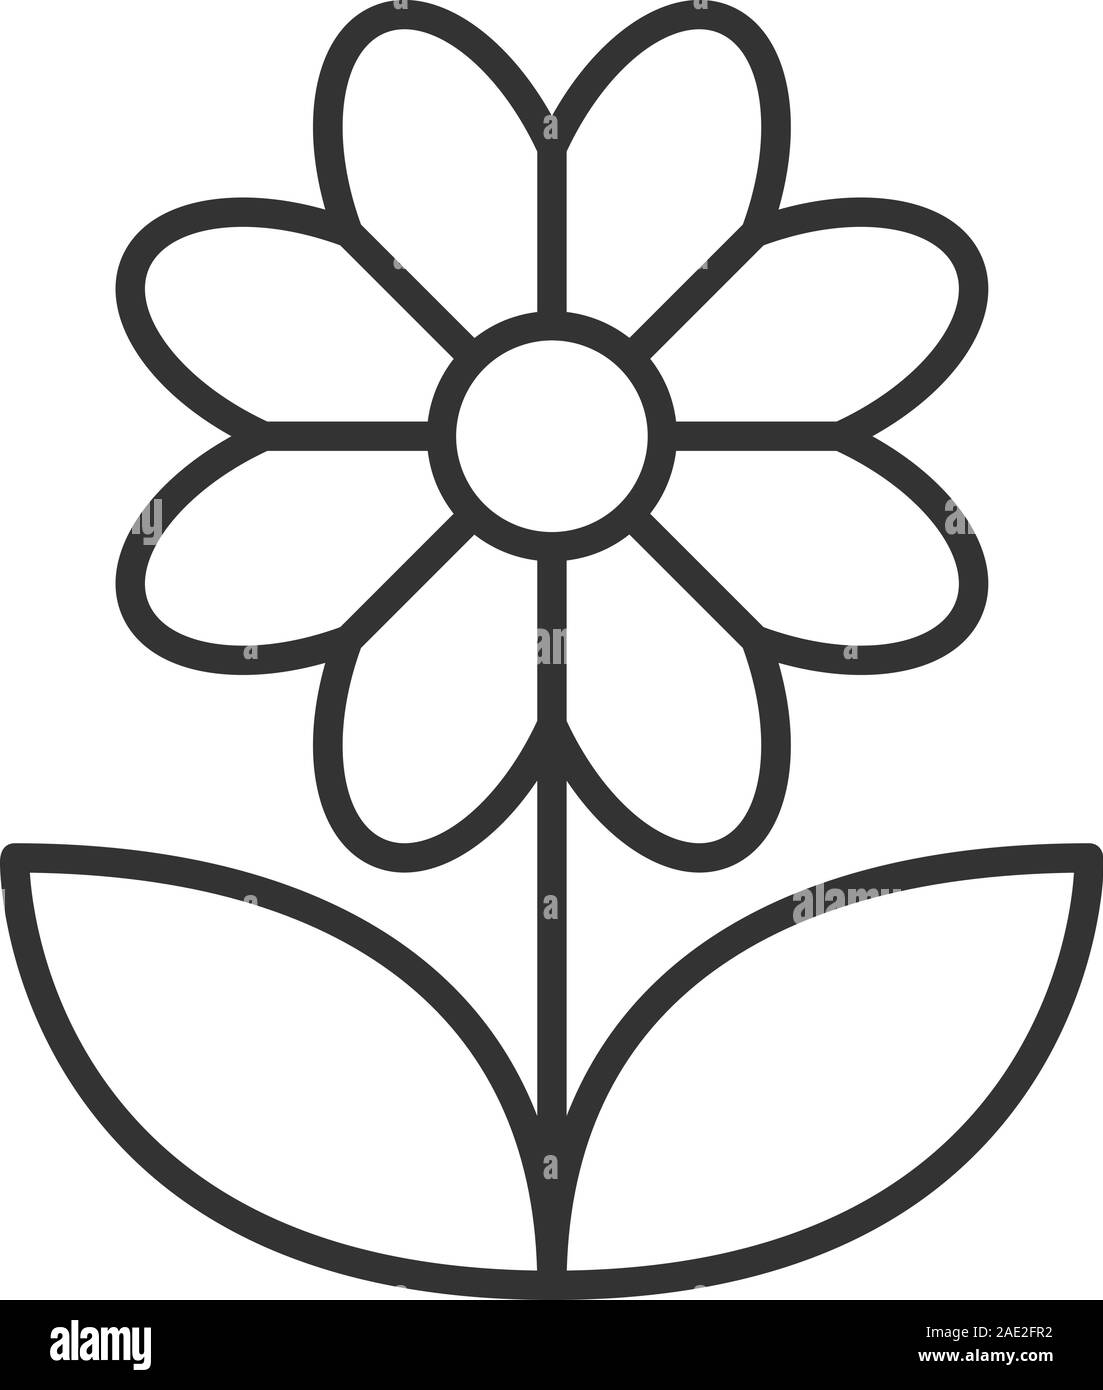 Hand drawn flower daisy outline sketch Royalty Free Vector